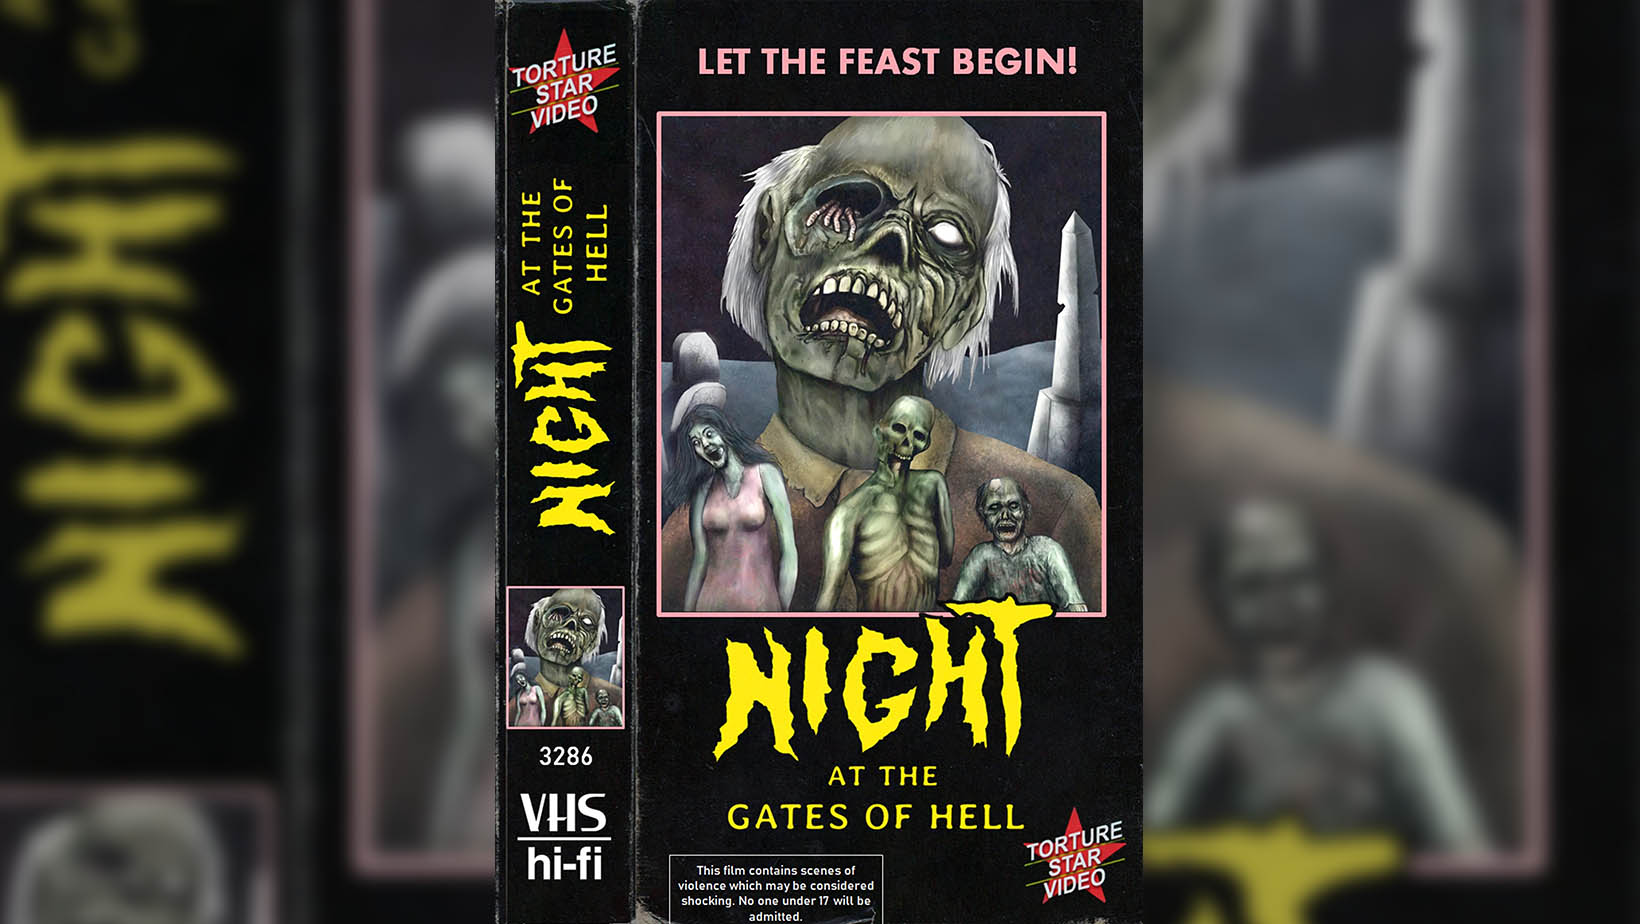 Night at the Gates of Hell' Review - Retro-Style Zombie Game